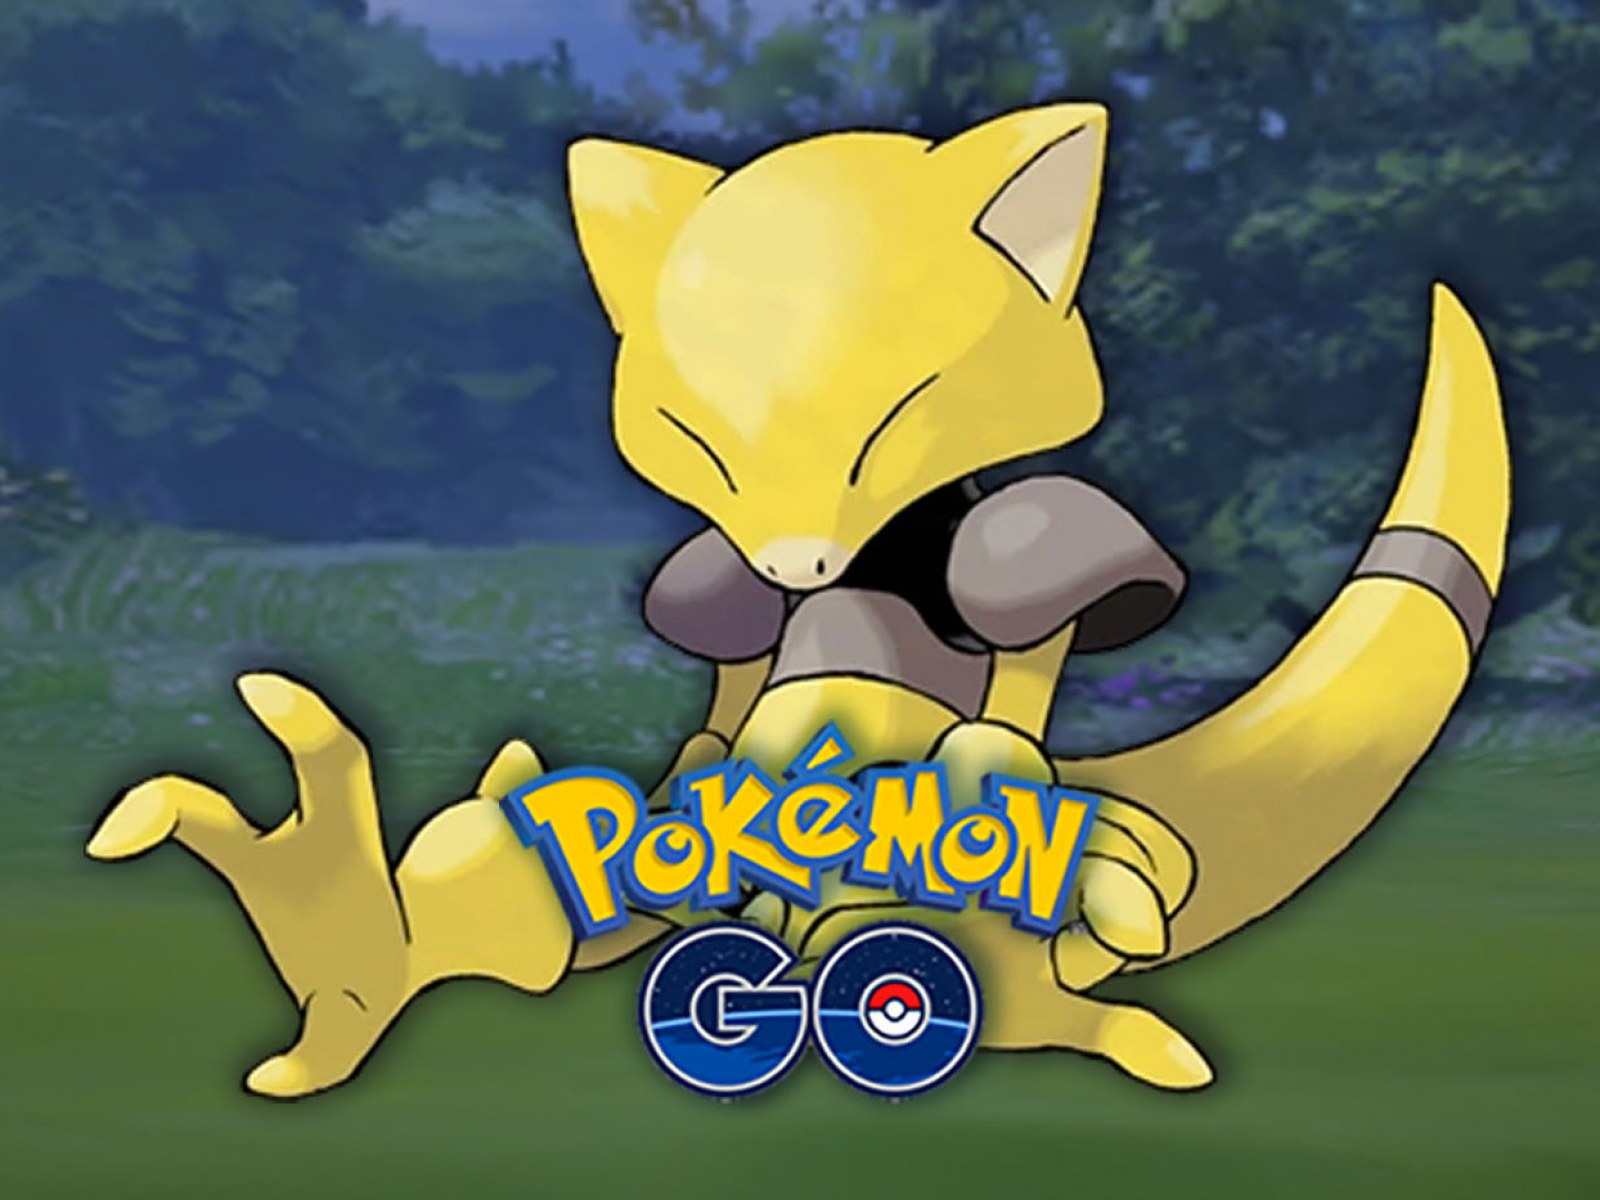 Pokémon Go' Community Day: Shiny Abra, Start Time and Everything You Need to Know